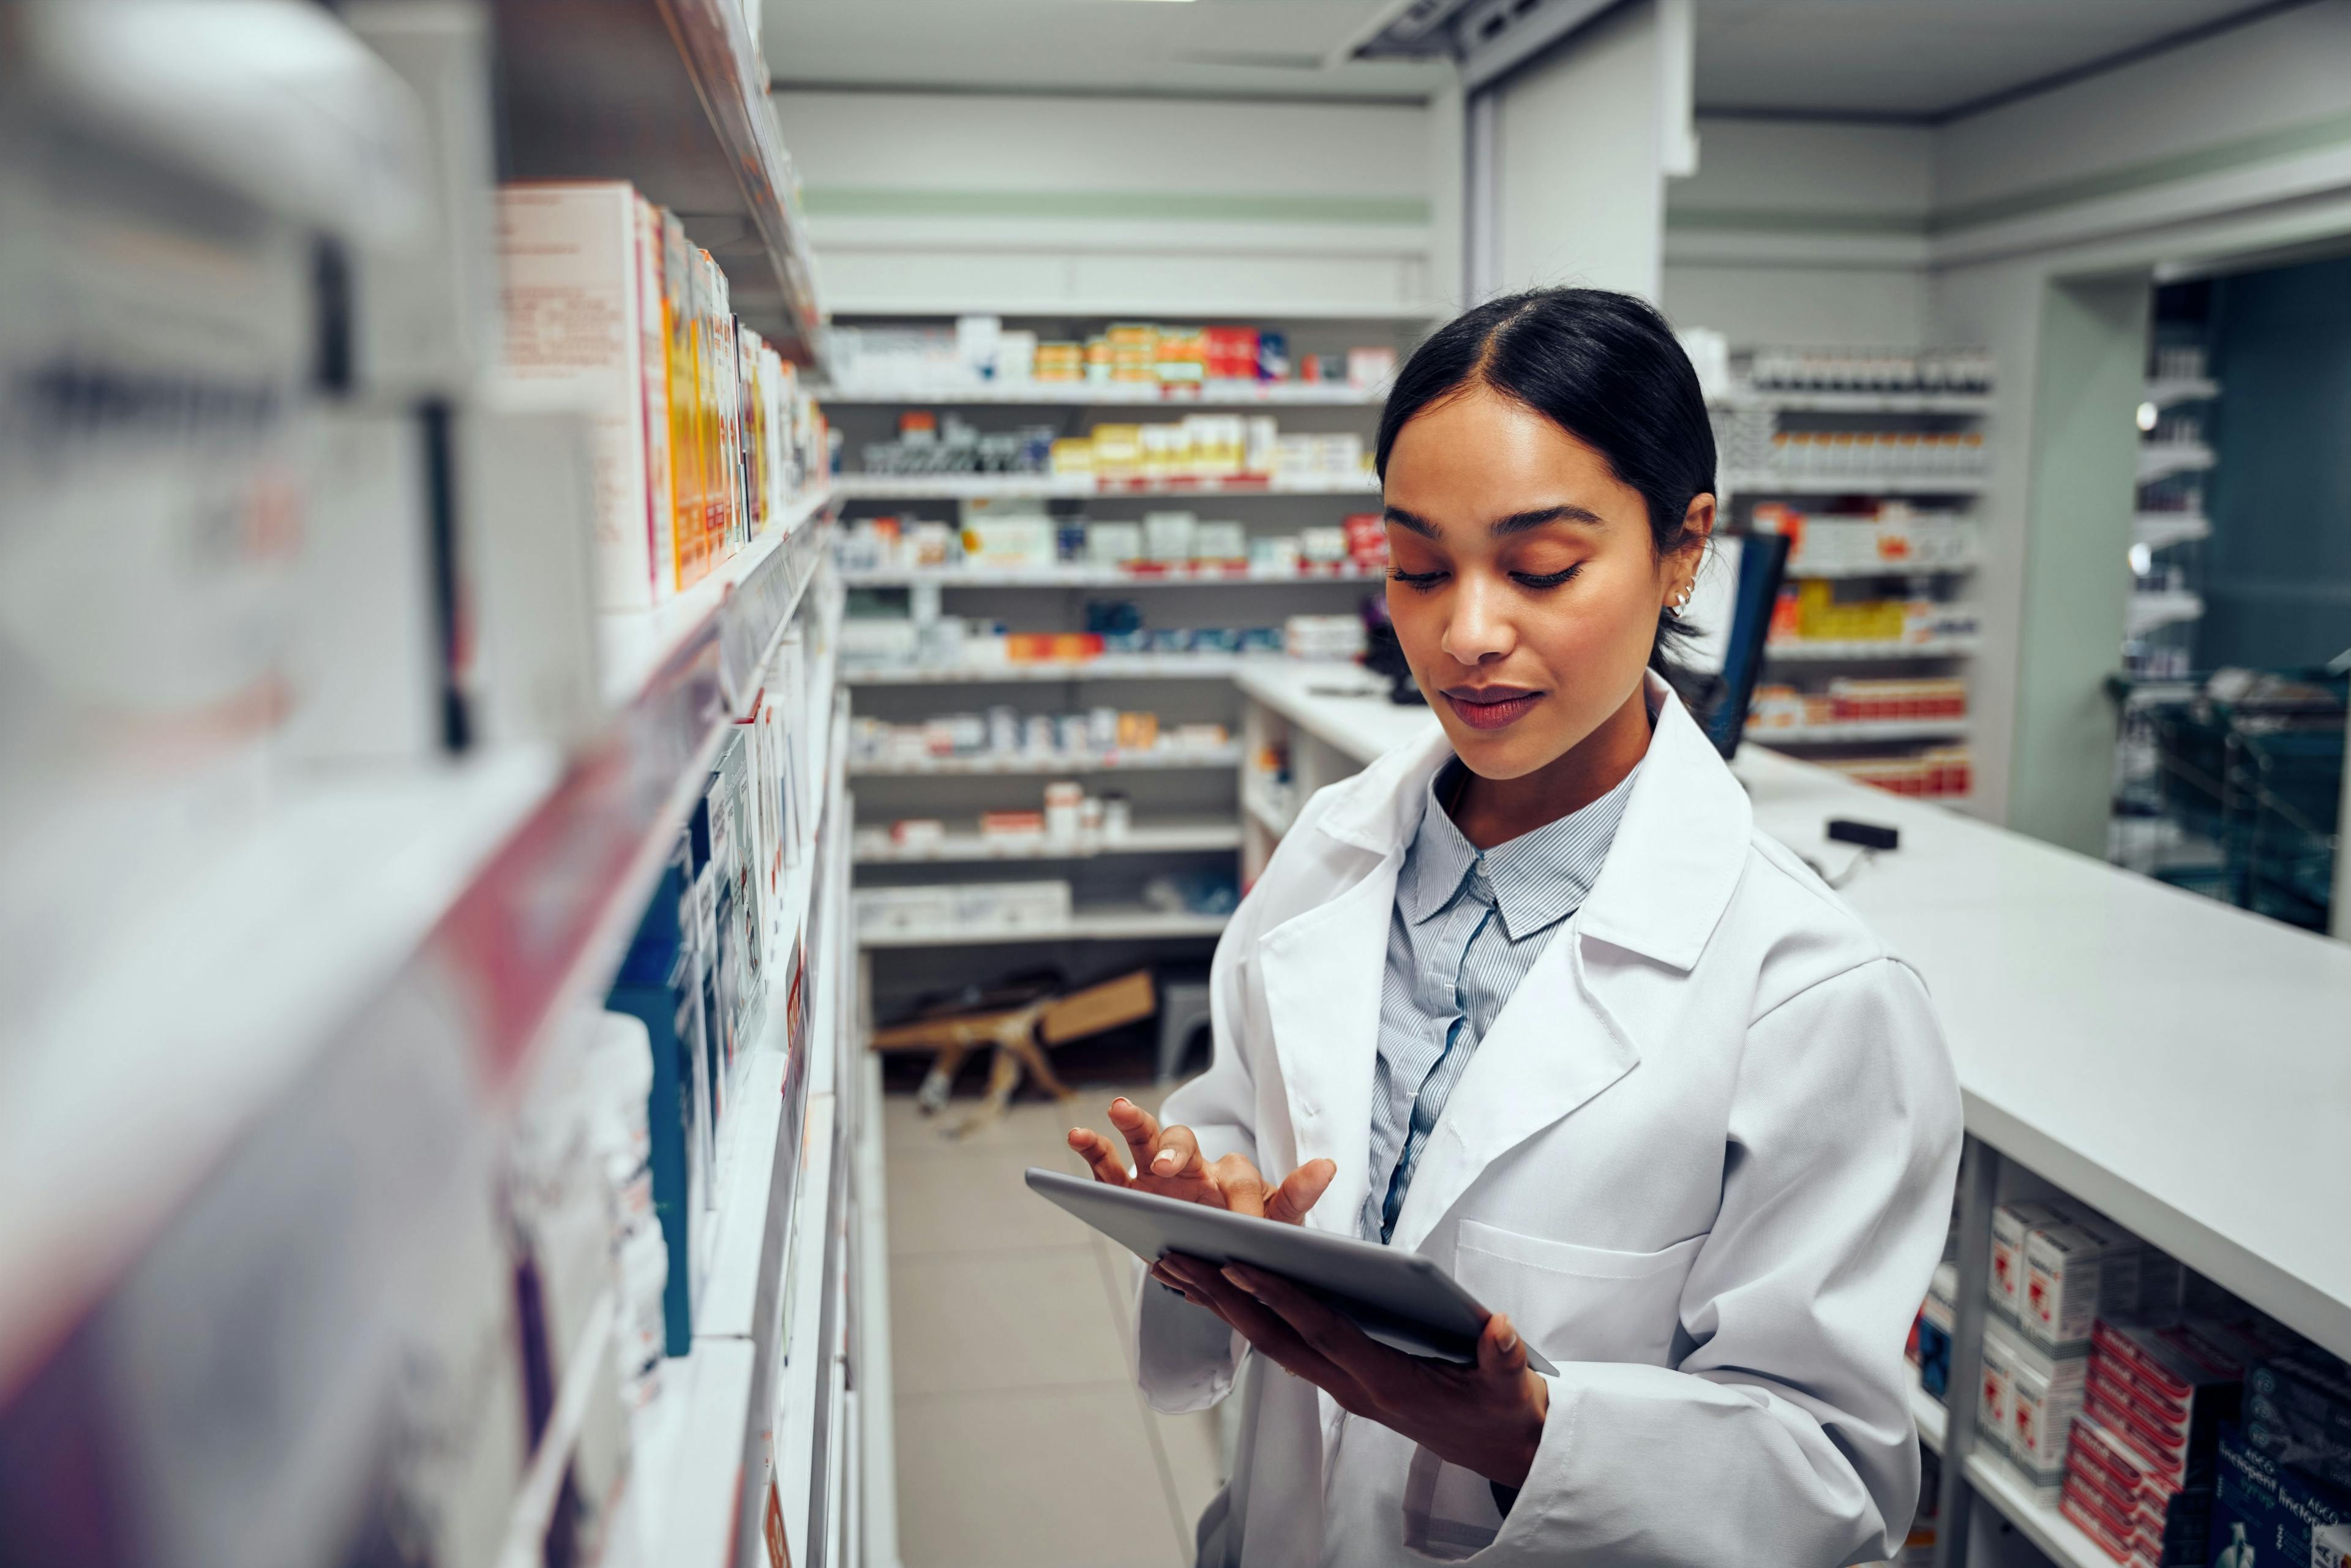 Young female pharmacist checking inventory of medicines in pharmacy | Image Credit: StratfordProductions - stock.adobe.com